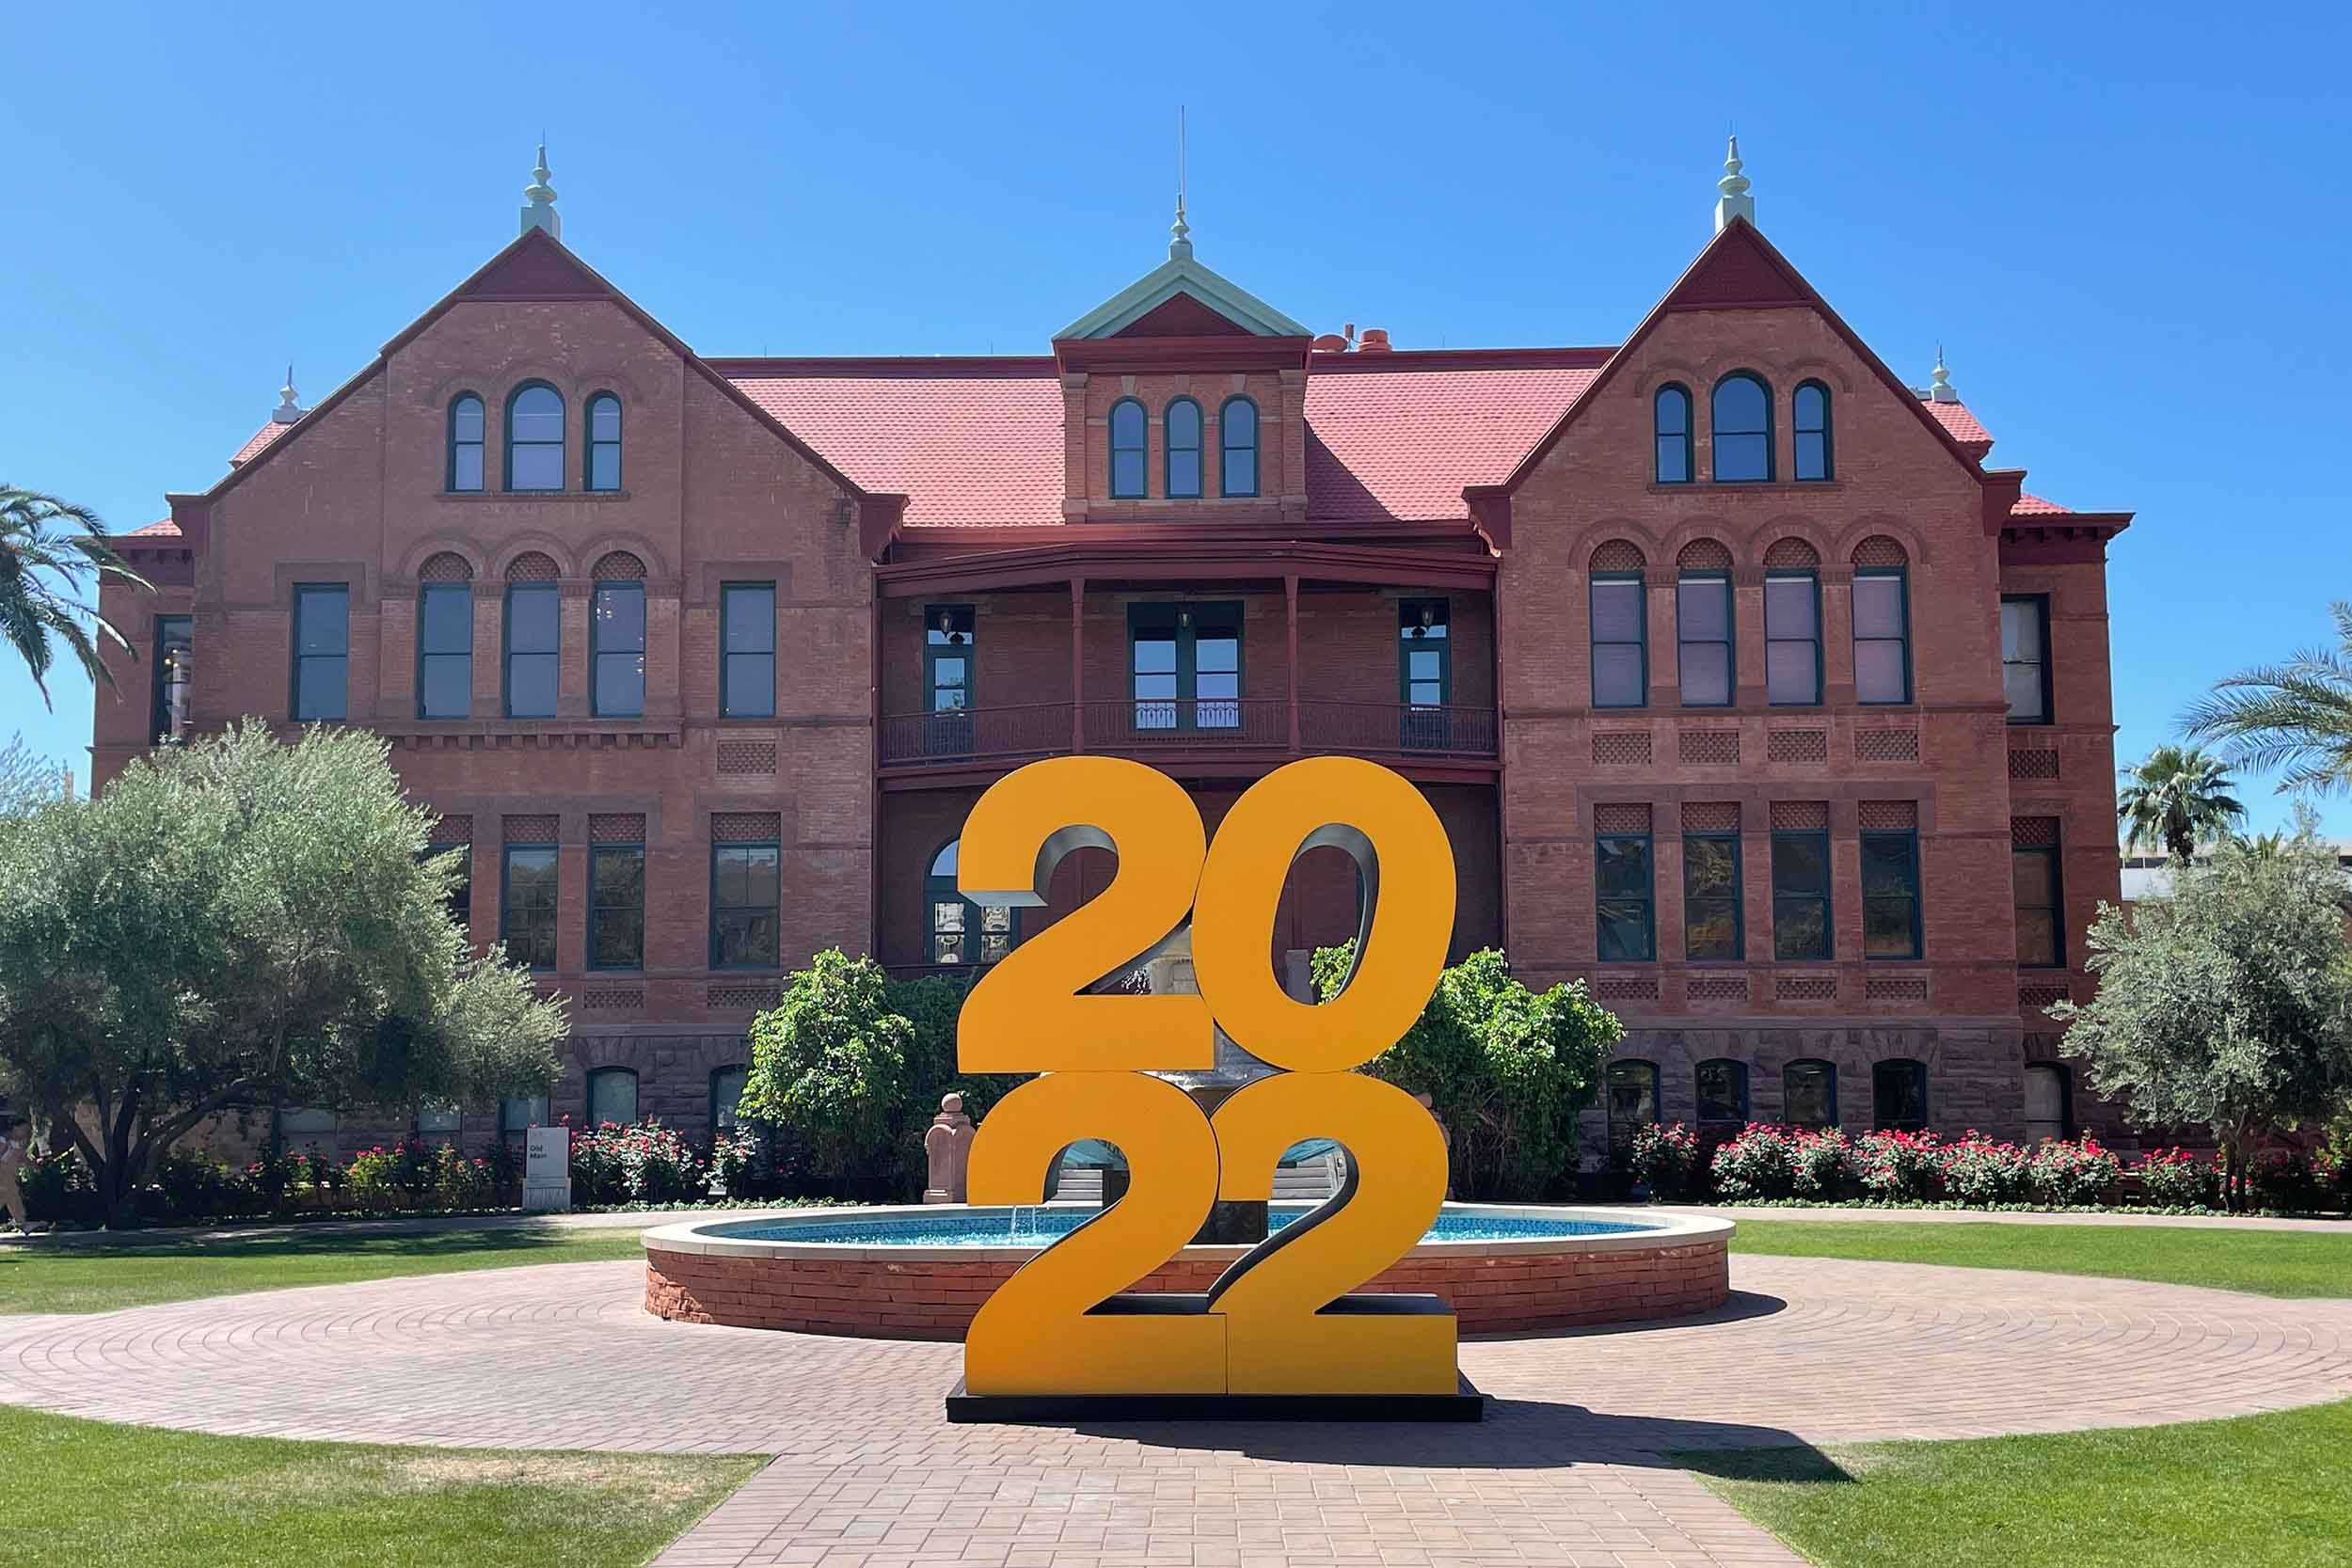 ASU's Old Main building with the gigantic "2022" statue in front of it.